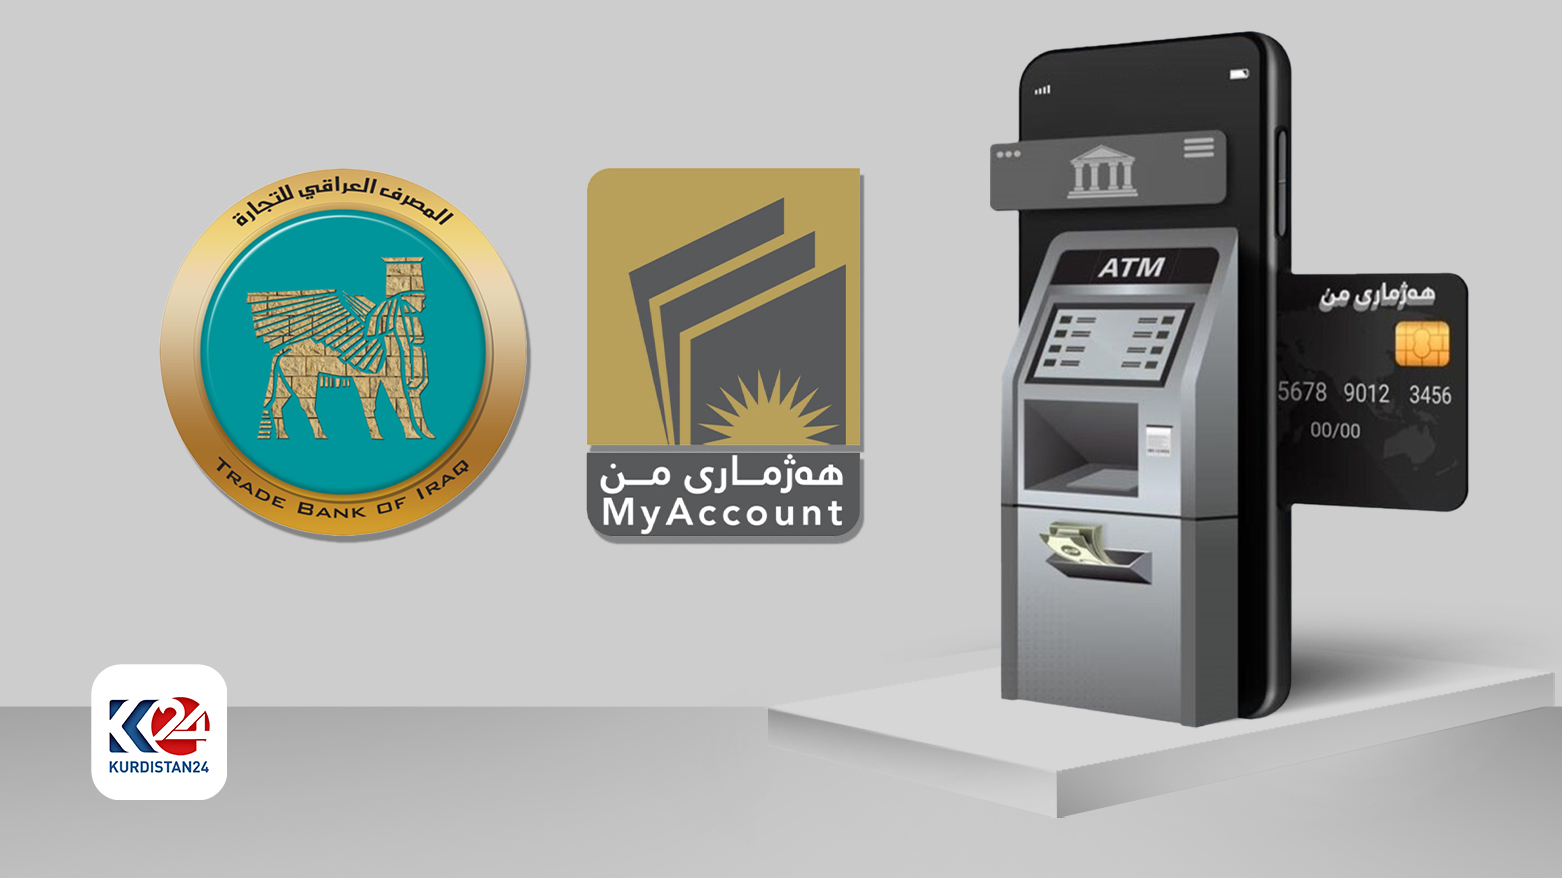 The logo of the Trade Bank of Iraq (left) and the MyAccount project. (Photo: Designed by Kurdistan24)